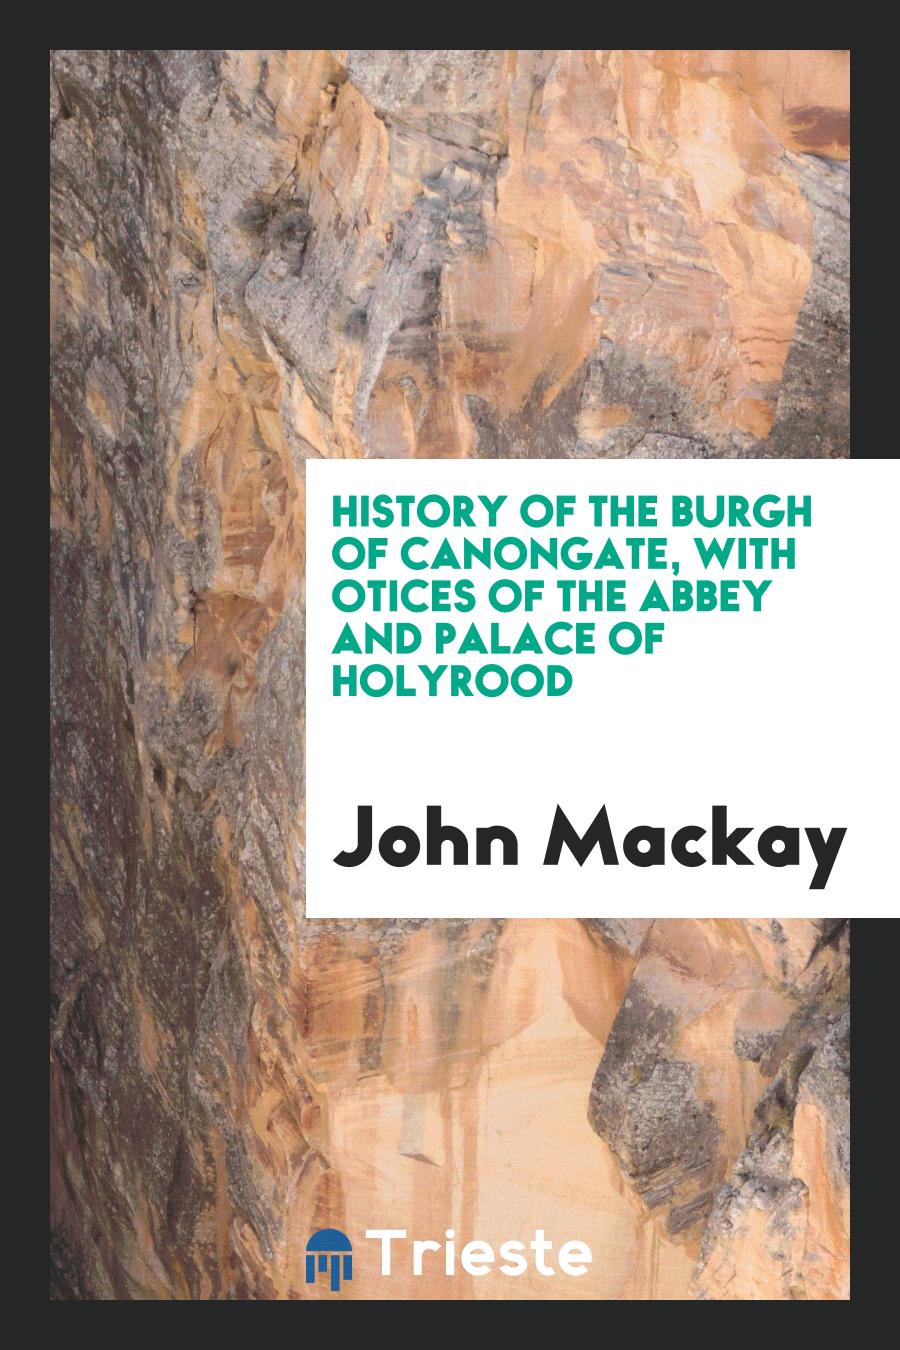 History of the Burgh of Canongate, with otices of the Abbey and Palace of Holyrood